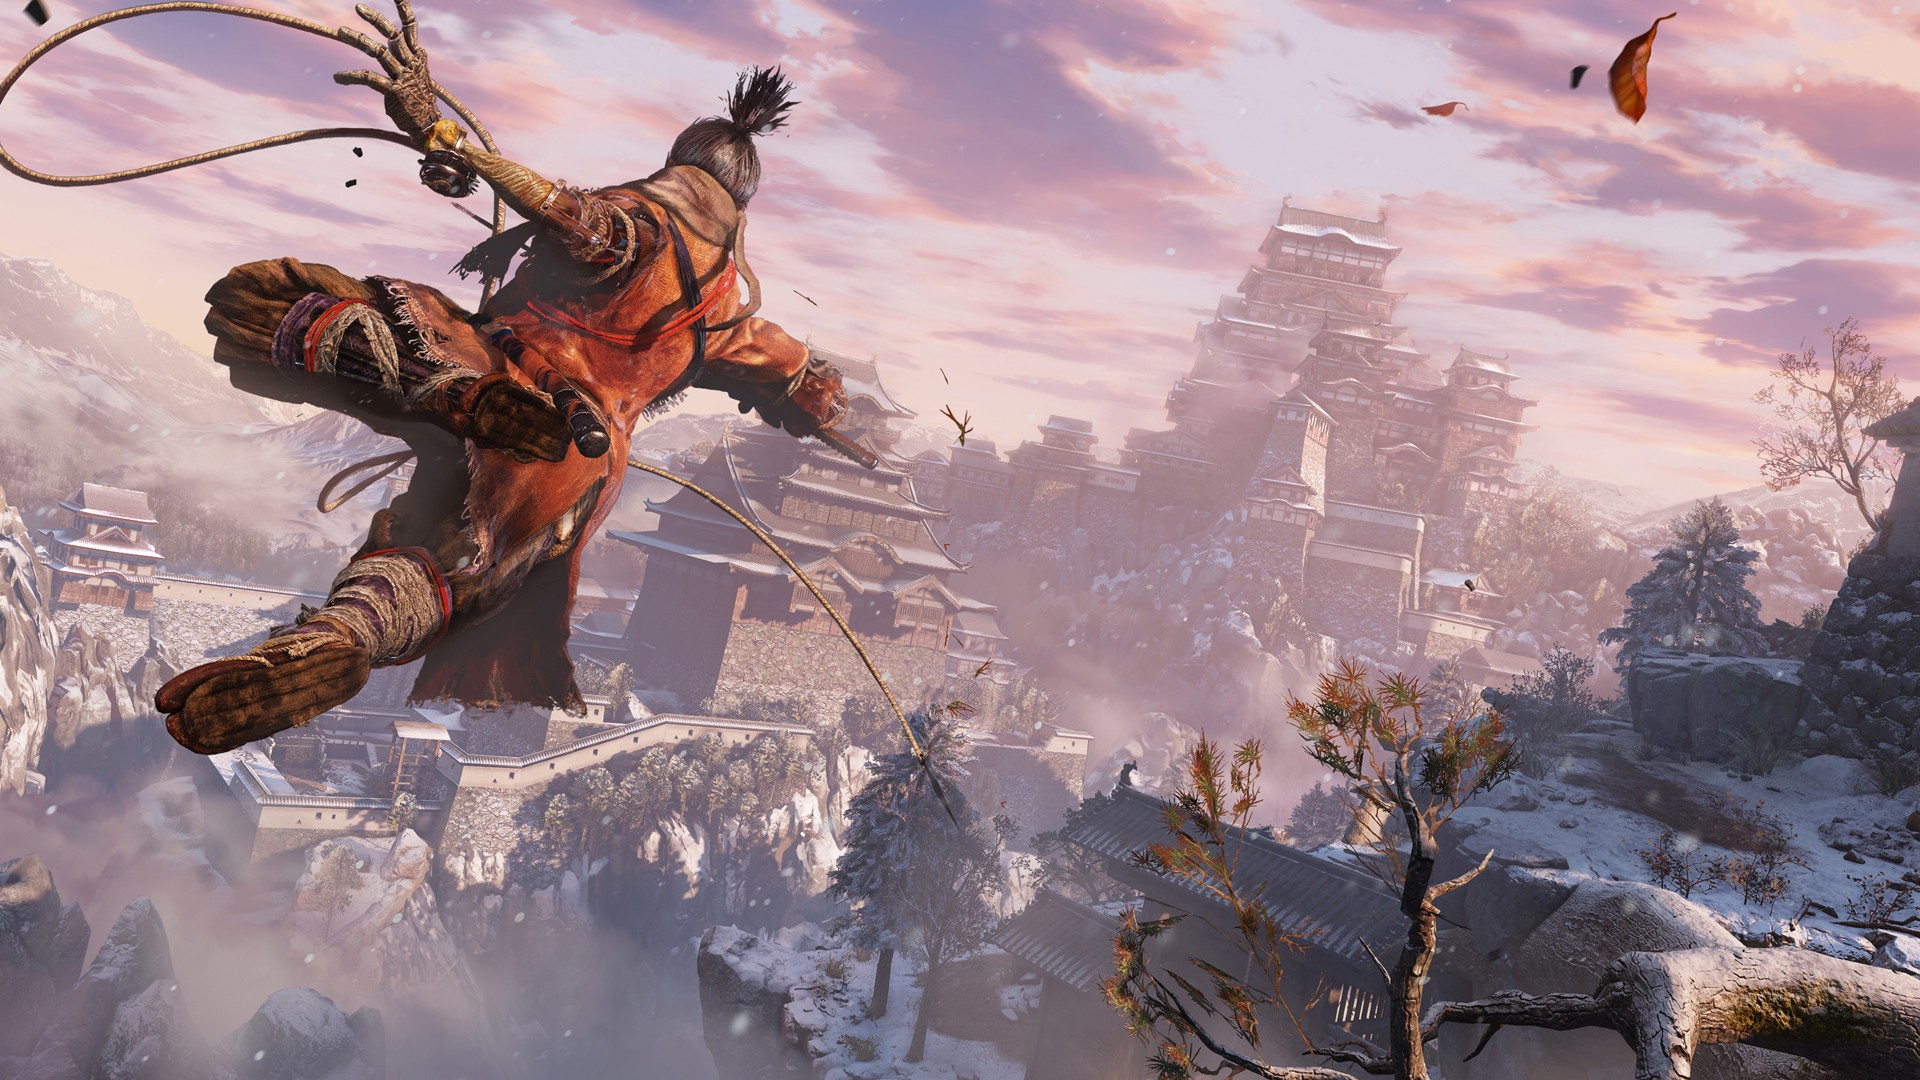 Video For E3 2018: Sekiro: Shadows Die Twice is a Ninja Nightmare from the Designer of Dark Souls